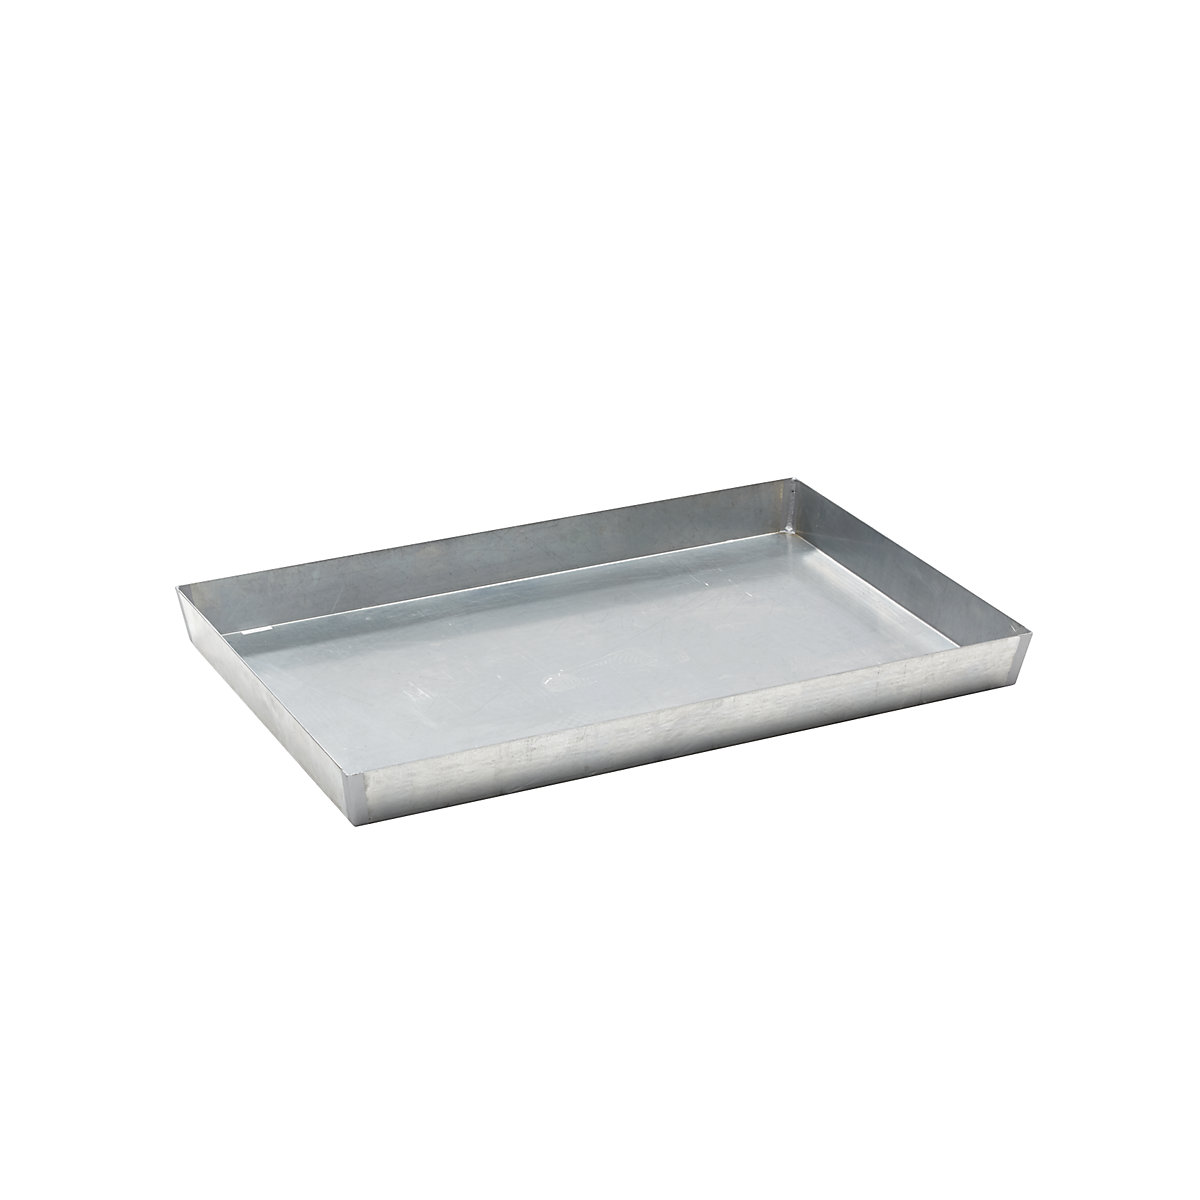 Steel small container pallet tray – eurokraft basic